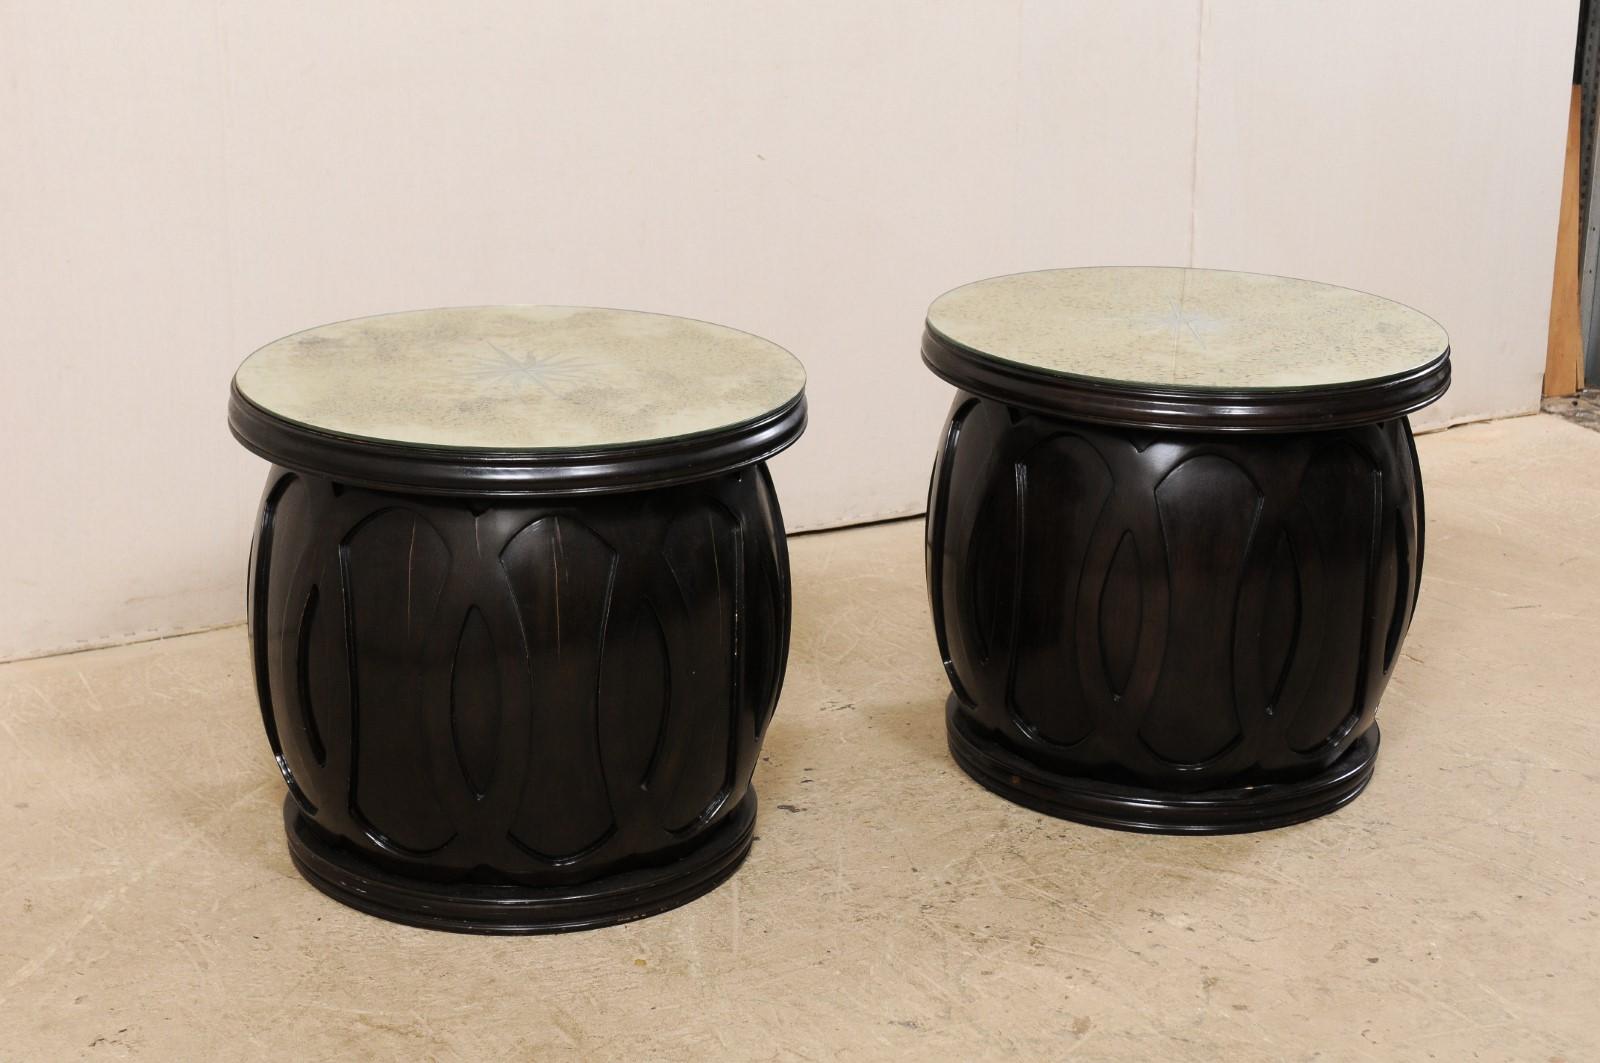 American Drum Style Side Tables with Artisan Crafted Verre Églomisé Sunburst Mirror Tops